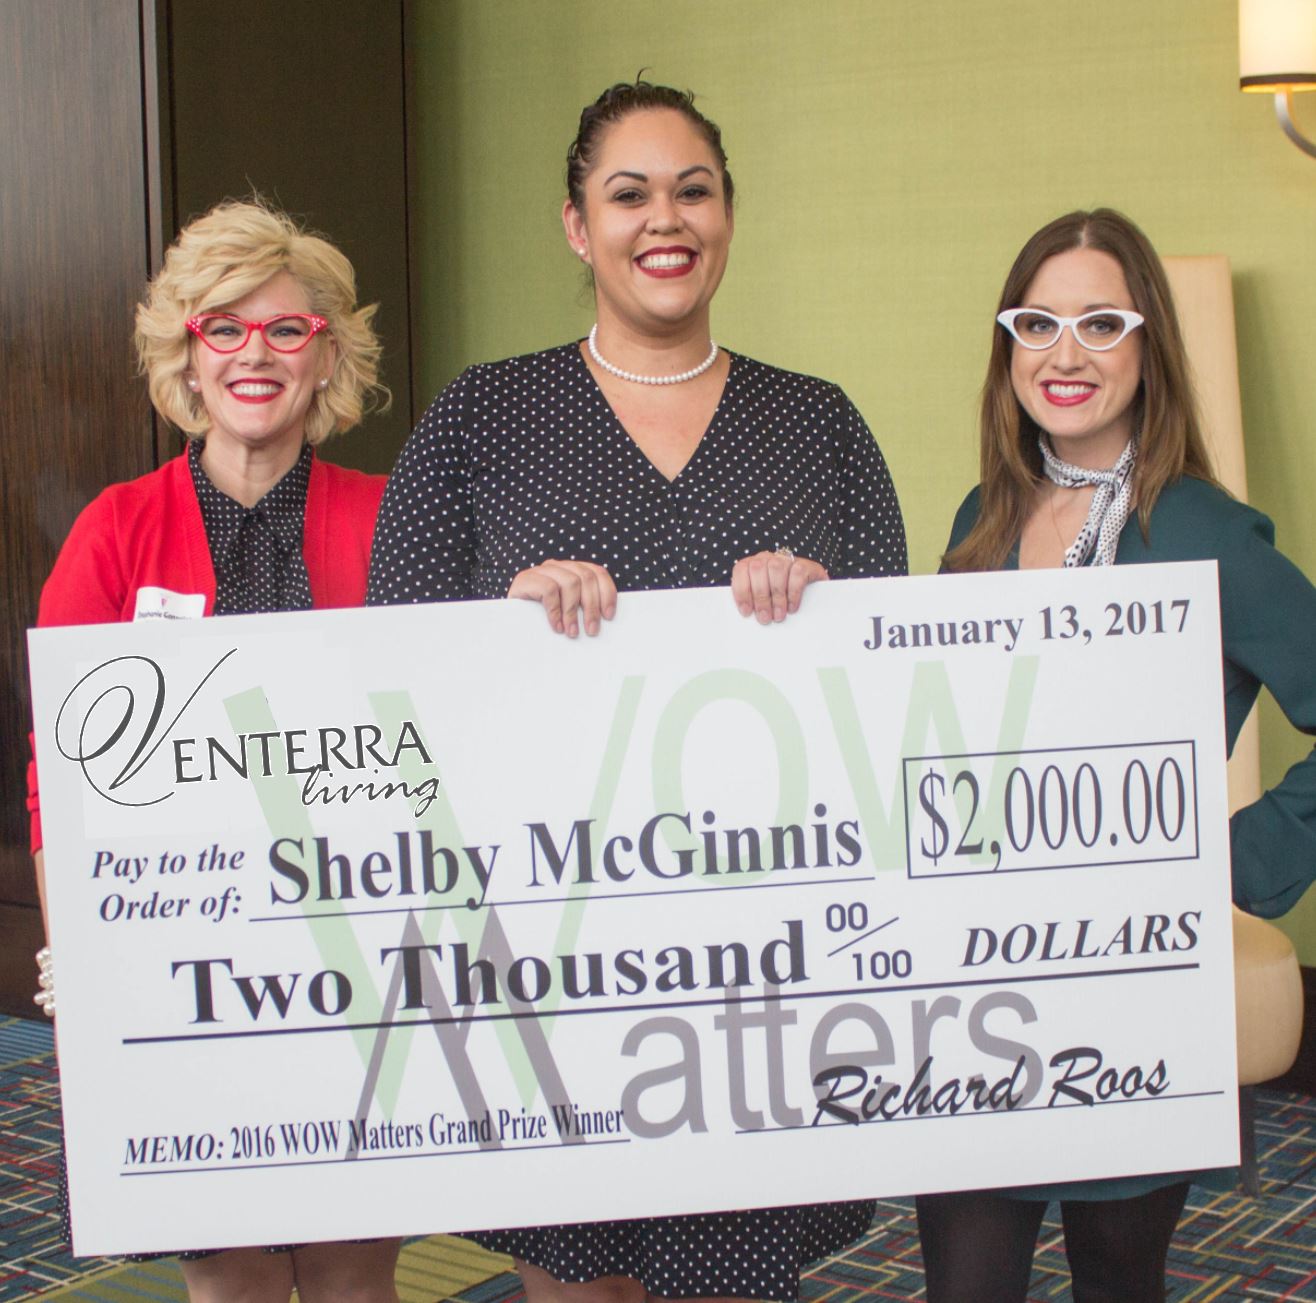 2016 WOW Grand Prize Winner - Shelby